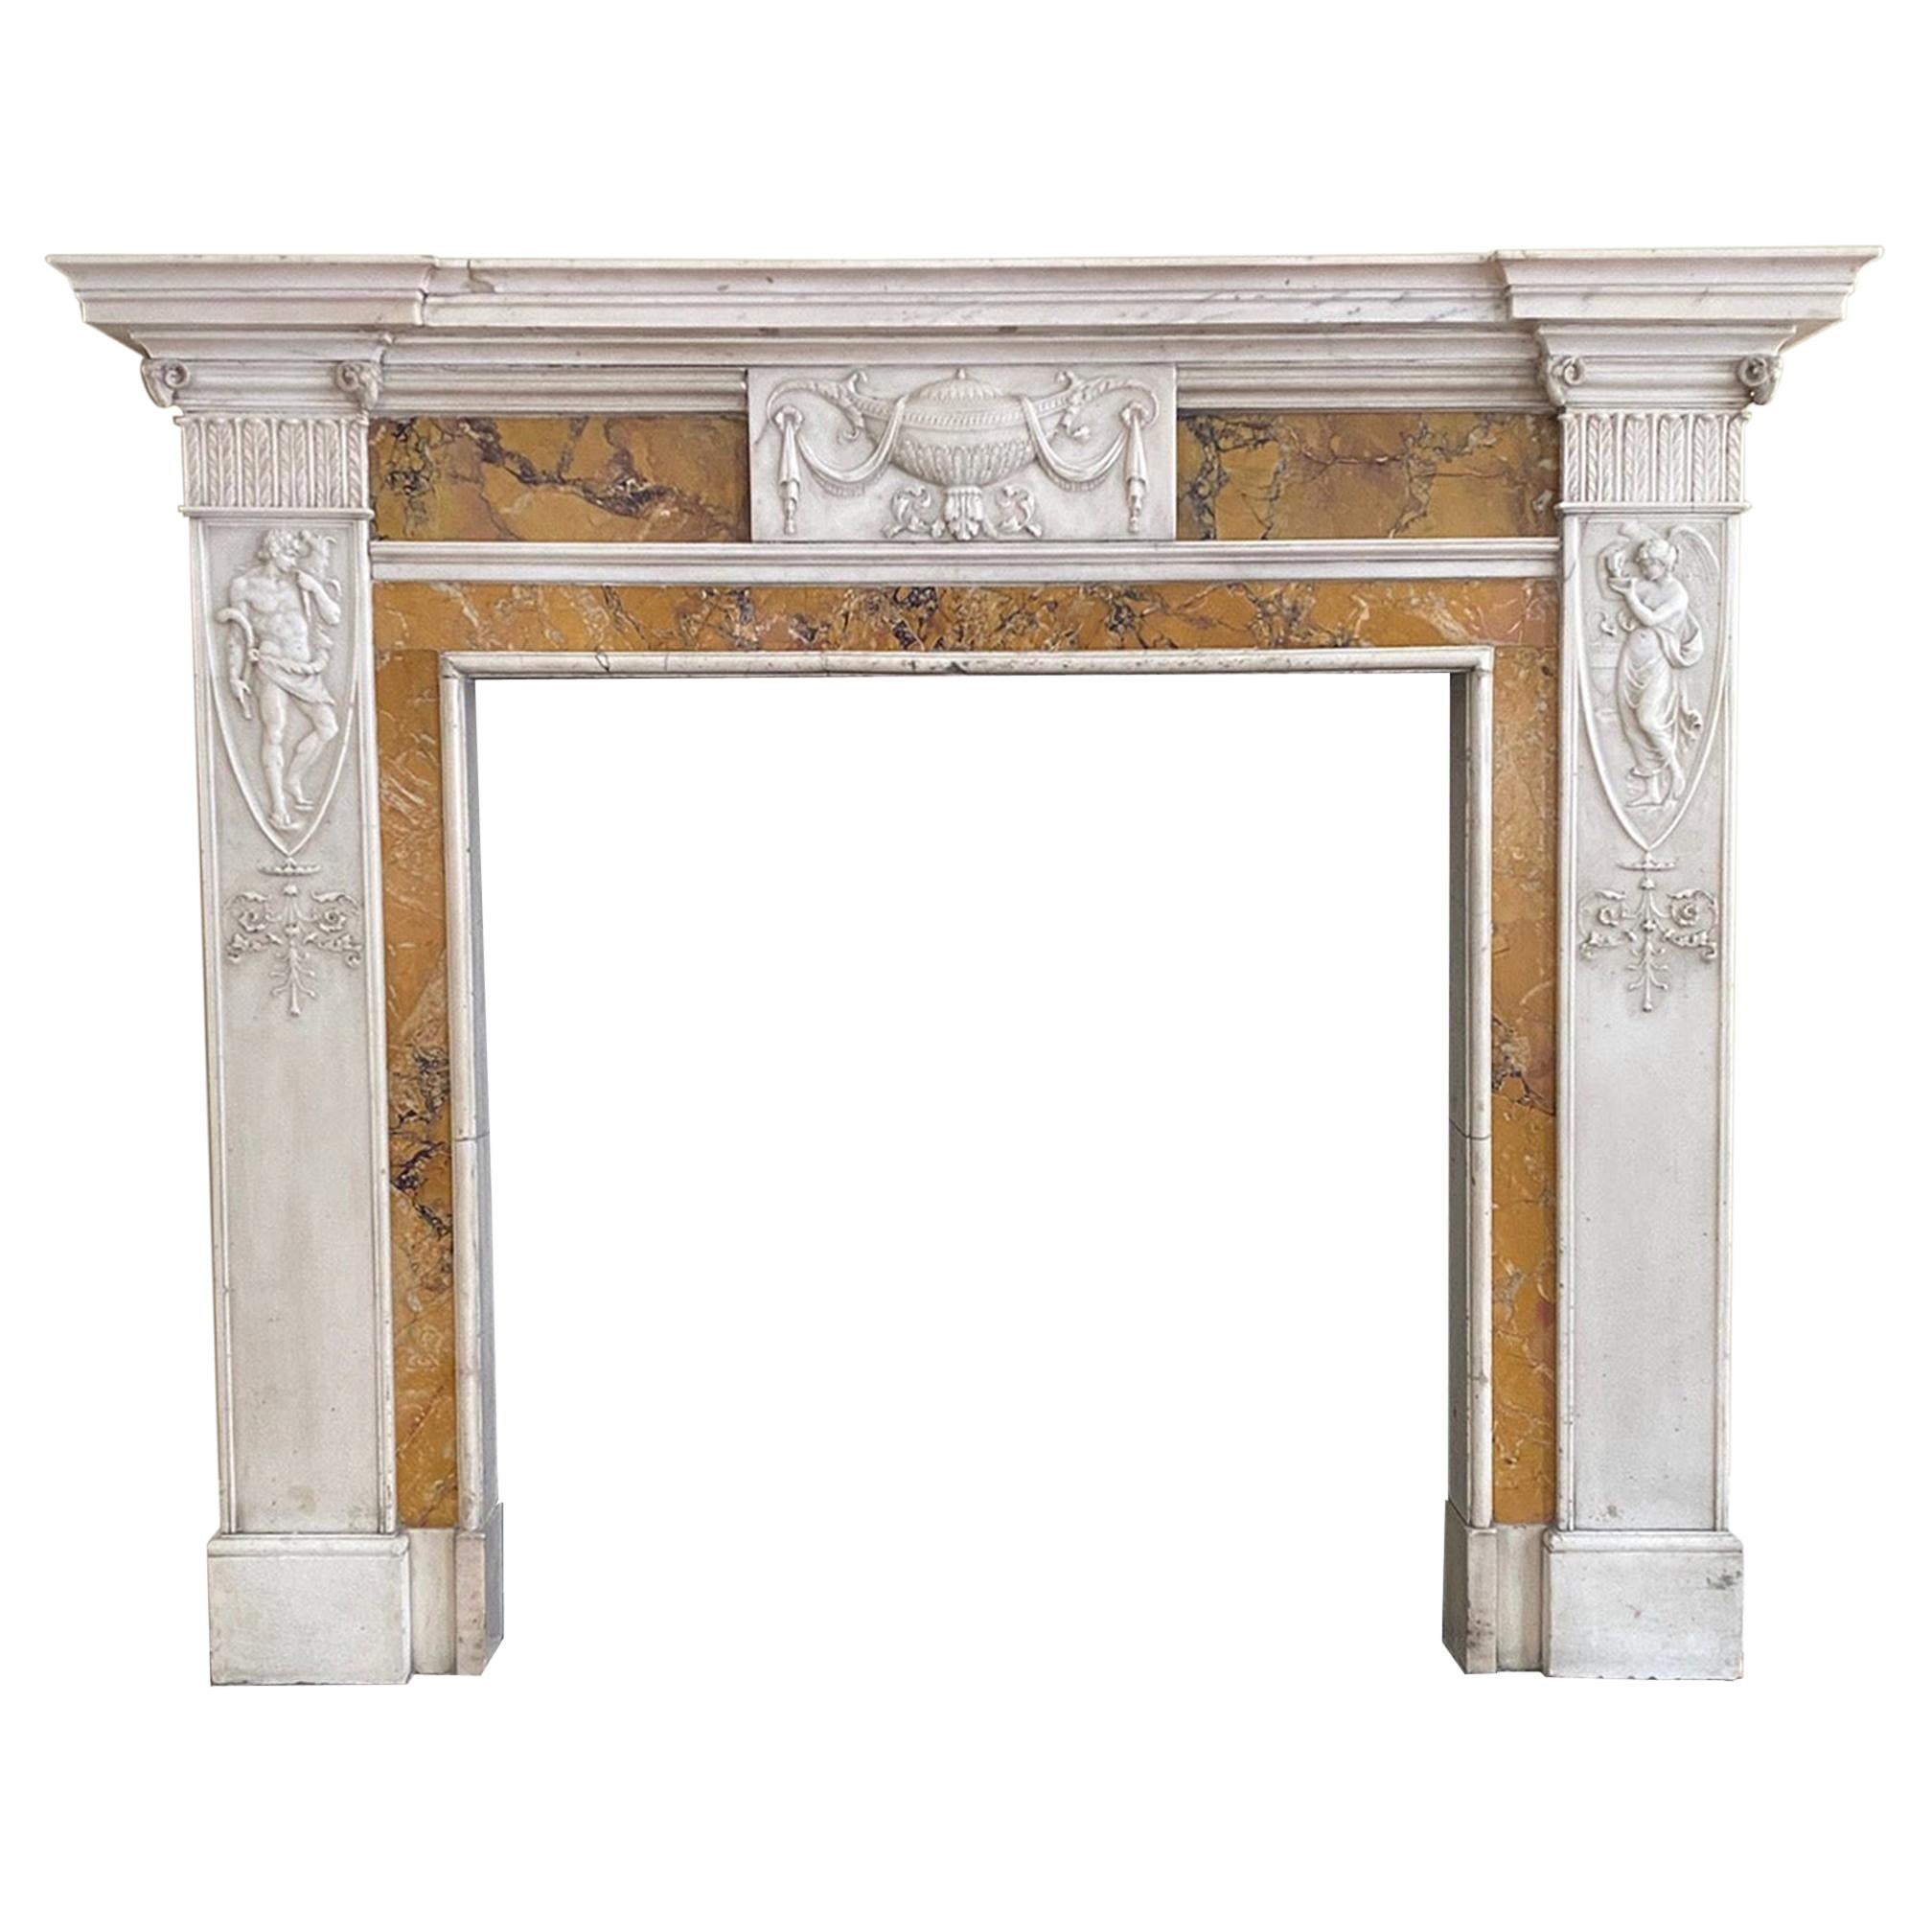 Important Neo-Classical Georgian Period White Statuary and Siena Marble Mantel For Sale